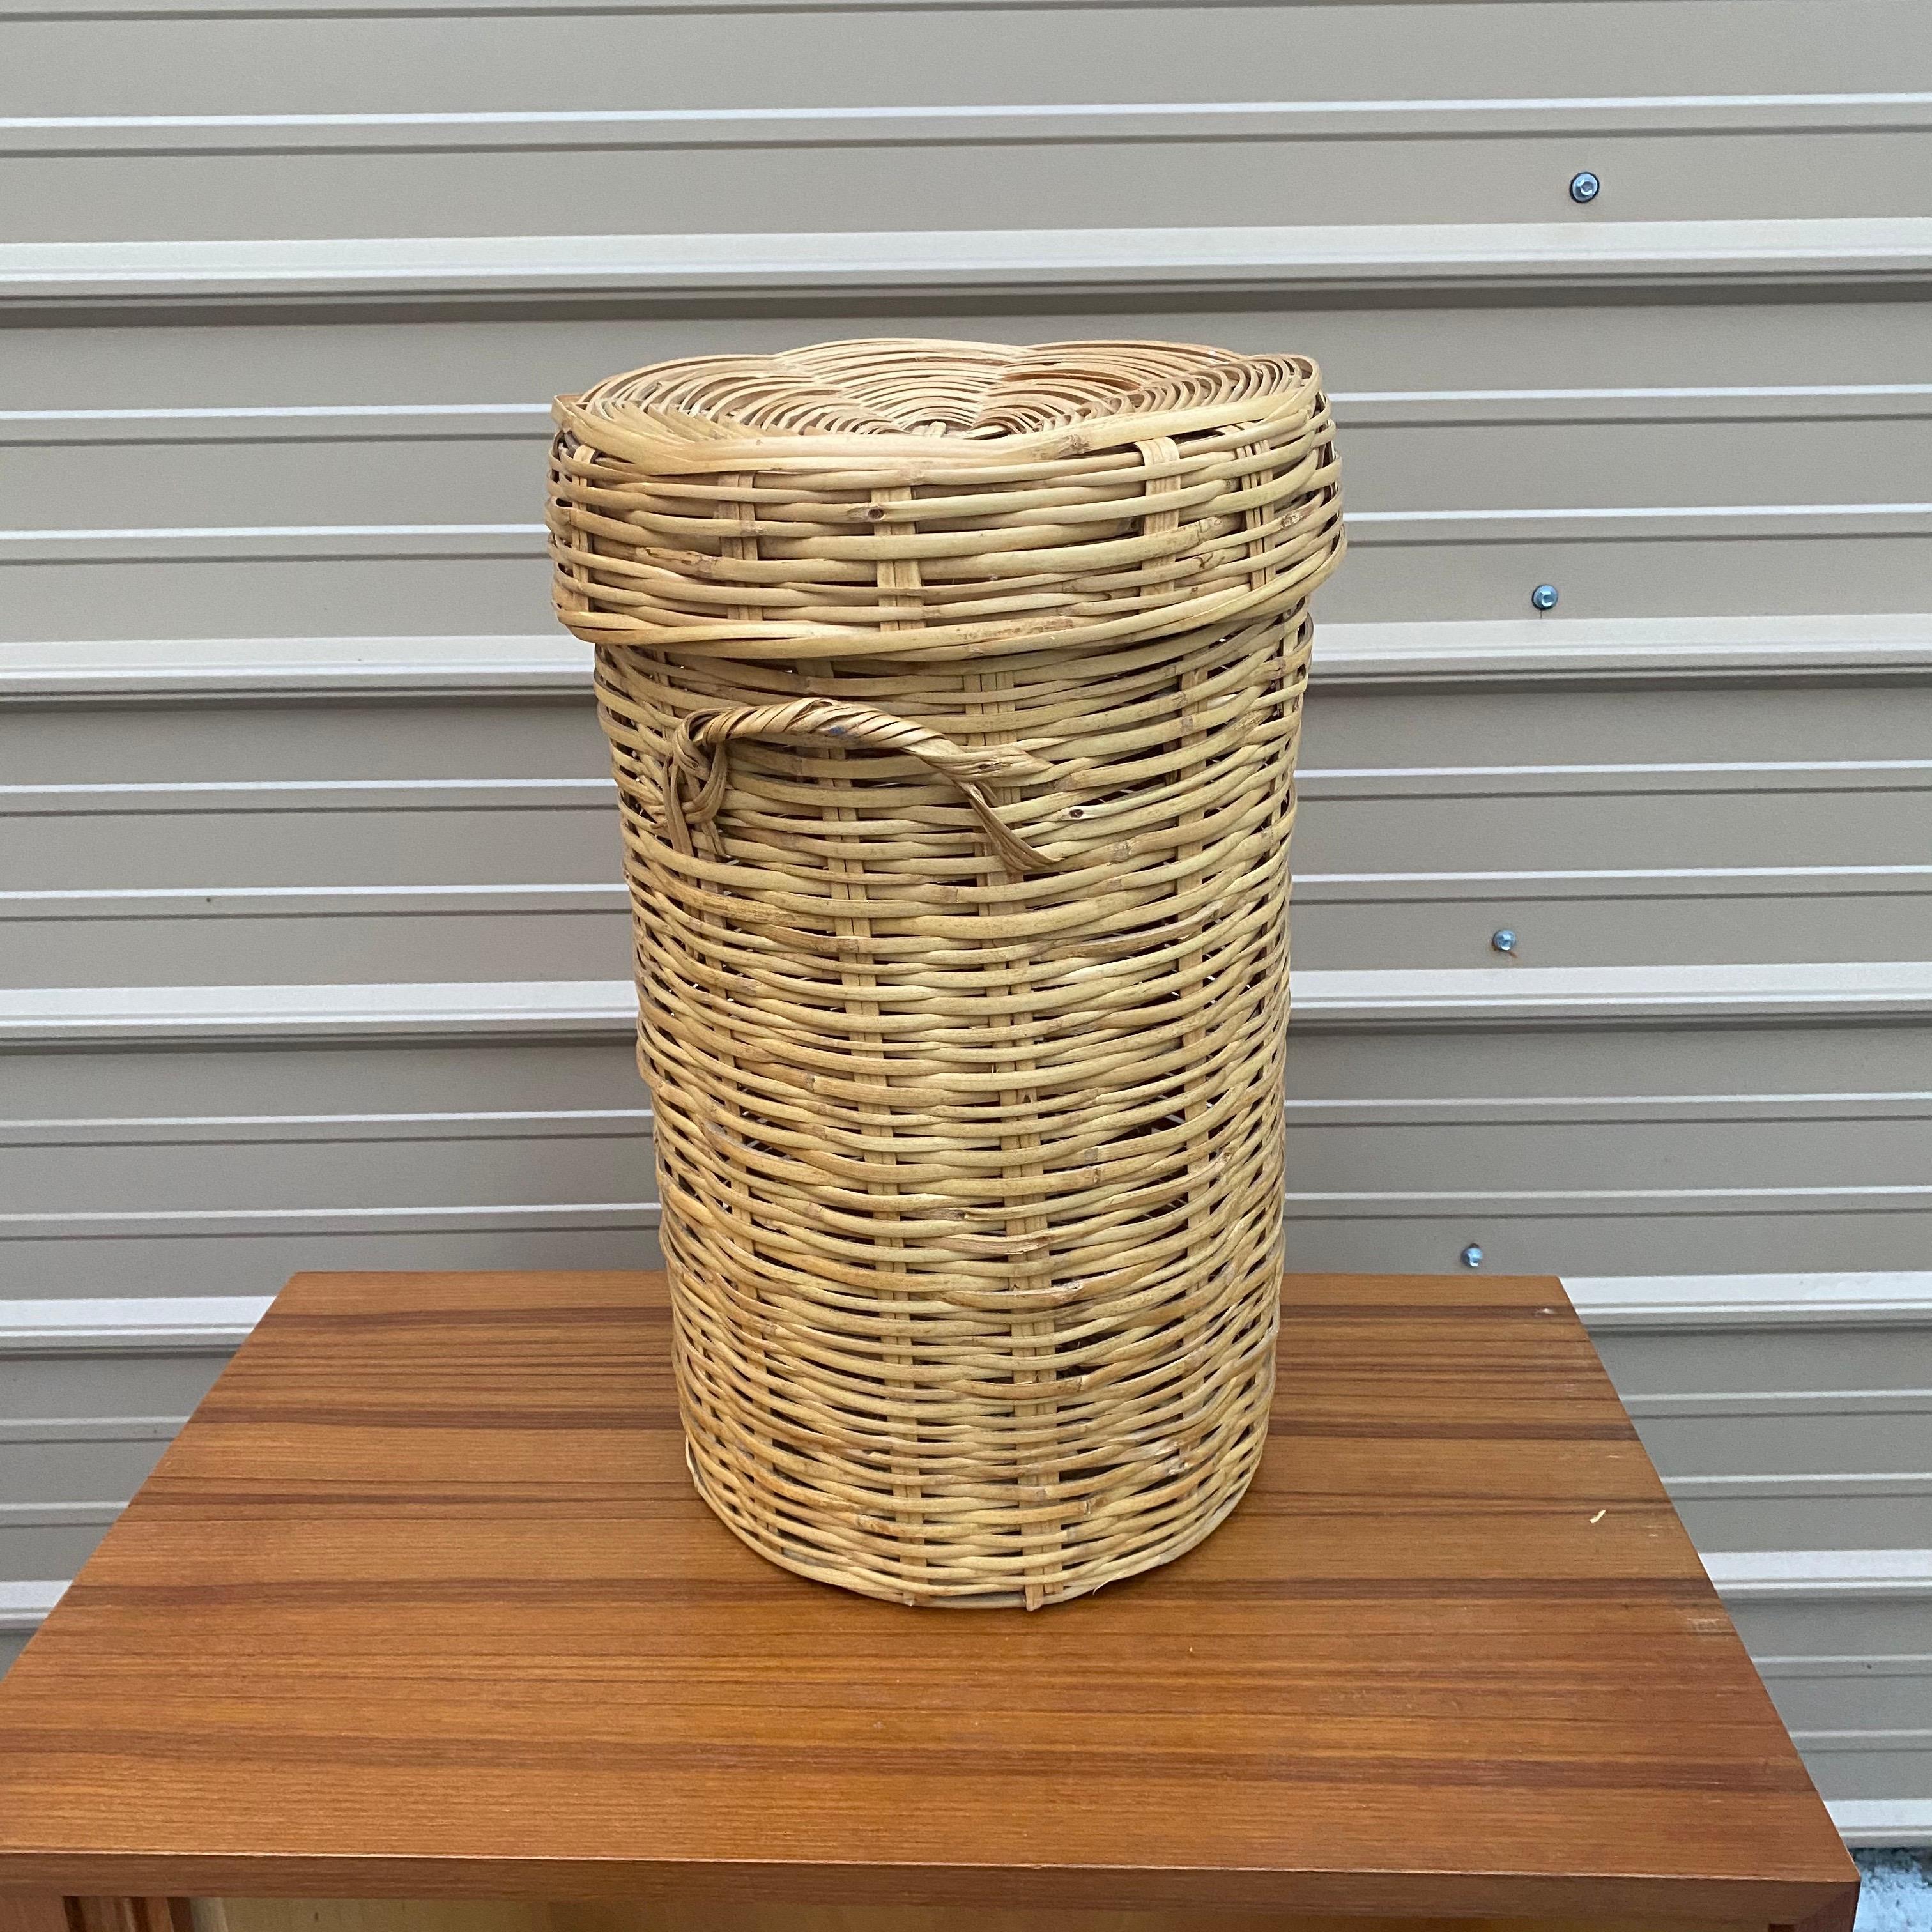 Vintage tall basket with a lid in great shape. Perfect as a wastebasket or for storage to tuck away clutter in a neat fashion. Timeless piece of decor. Comes with two pieces: the lid, and base.